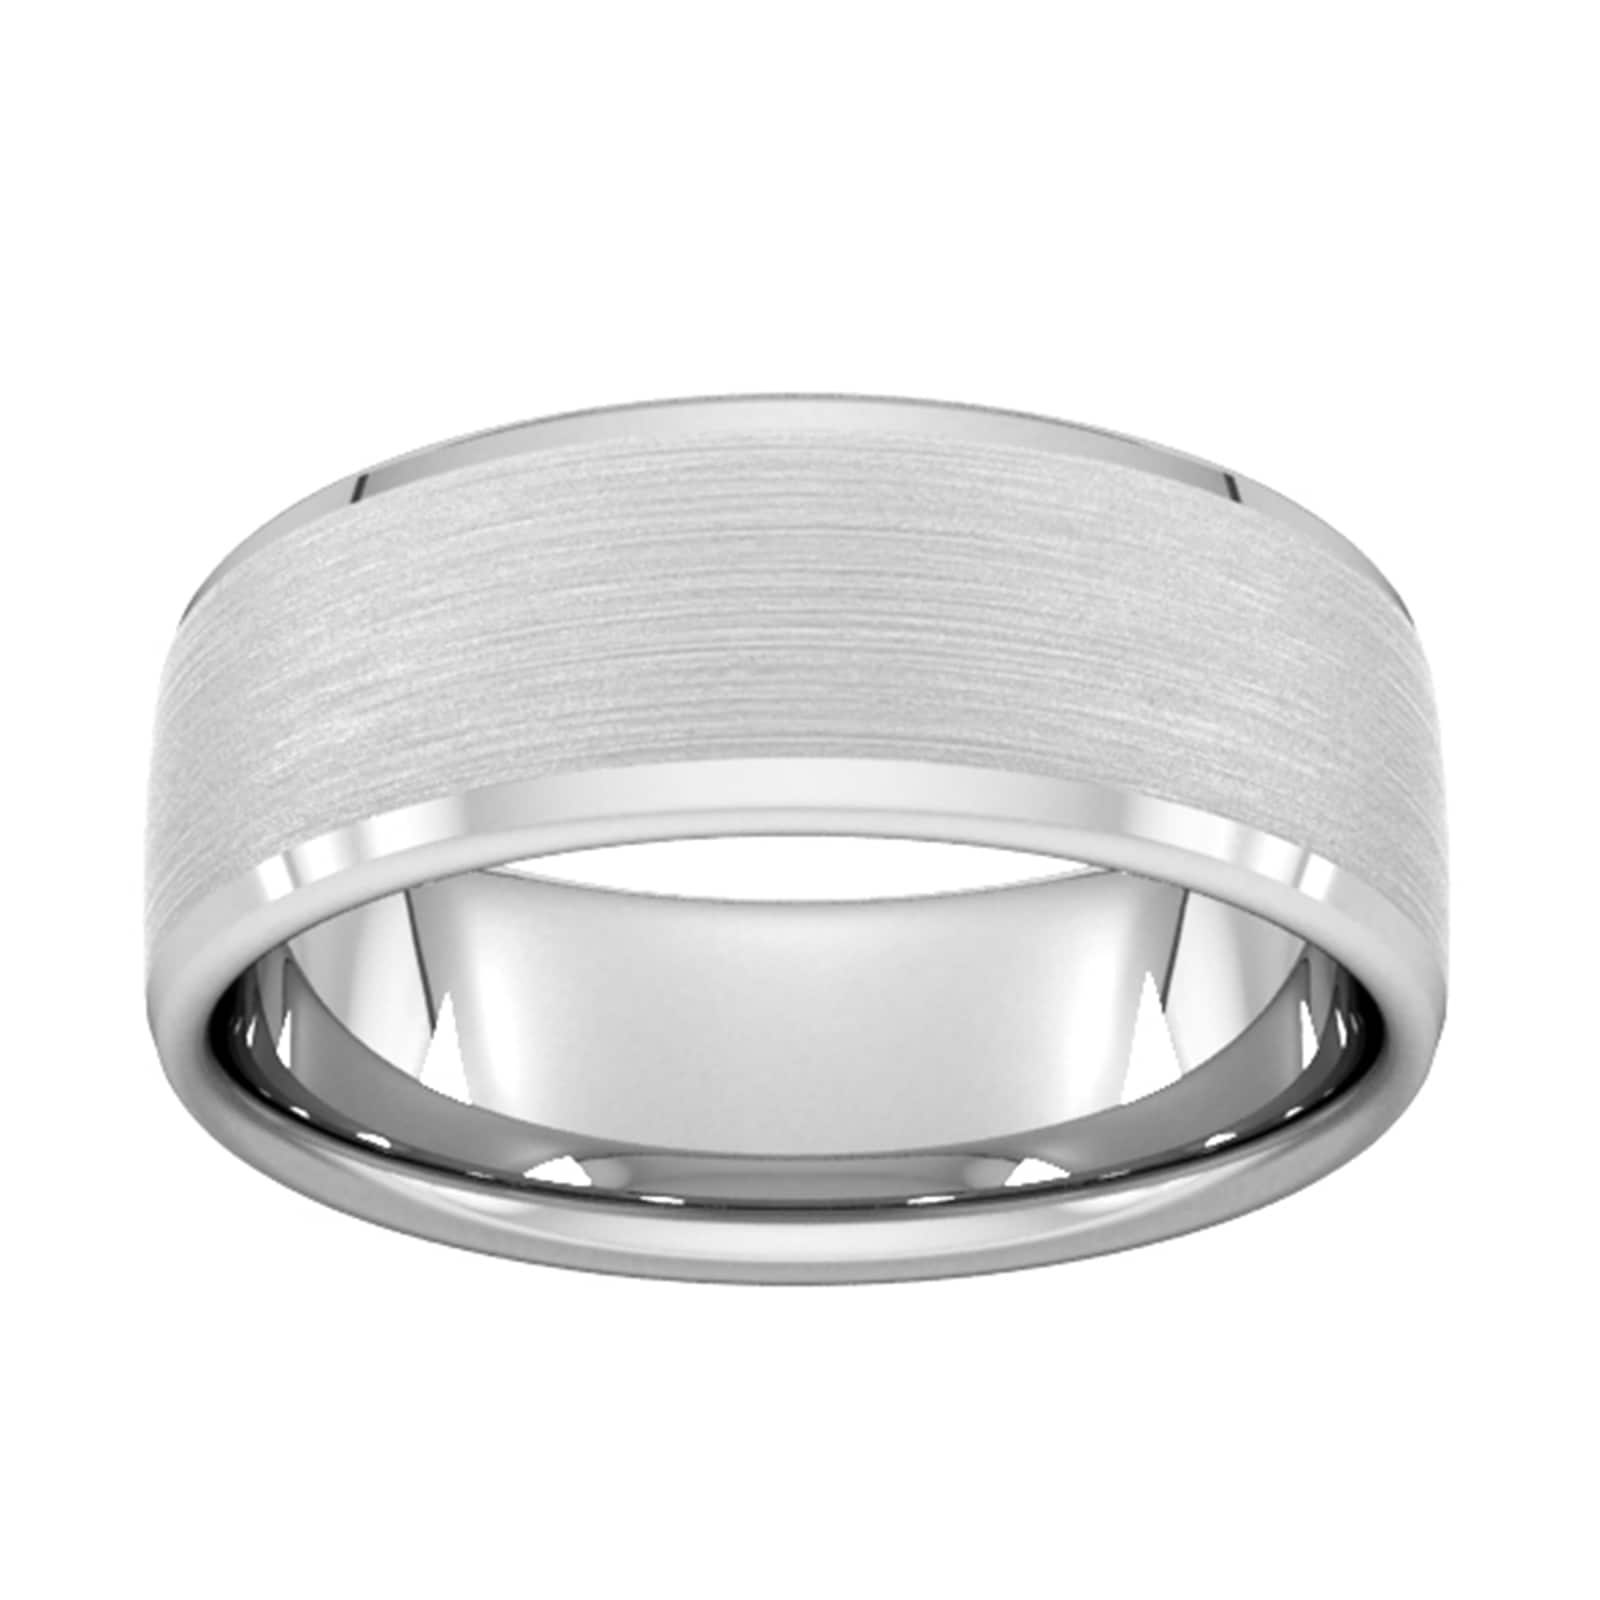 8mm Slight Court Heavy Polished Chamfered Edges With Matt Centre Wedding Ring In 18 Carat White Gold - Ring Size M